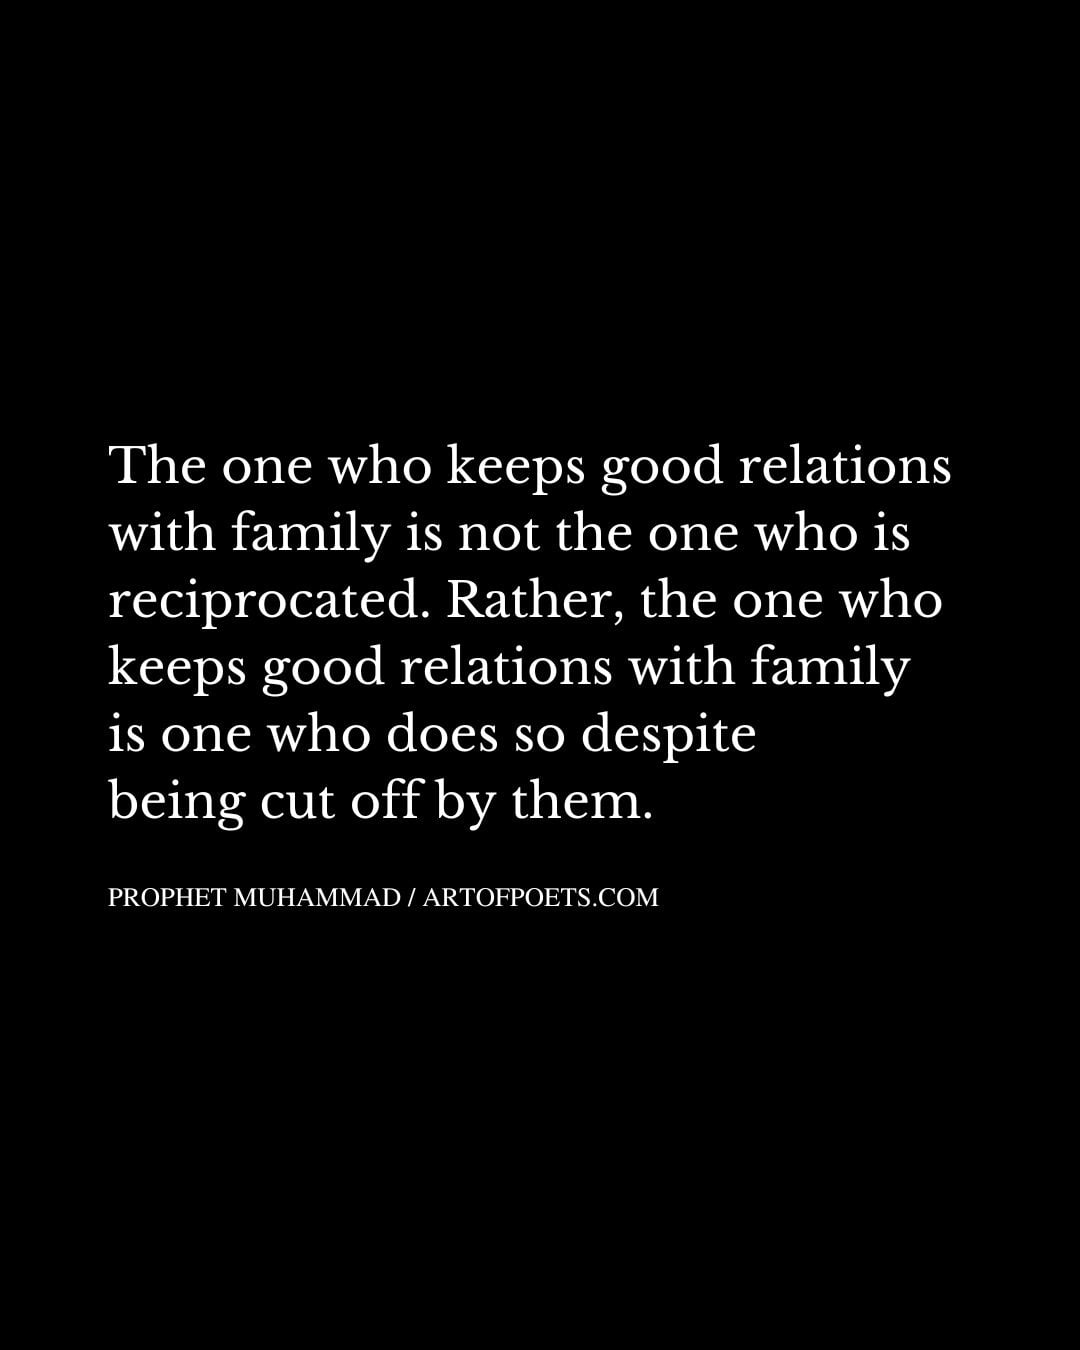 The one who keeps good relations with family is not the one who is reciprocated